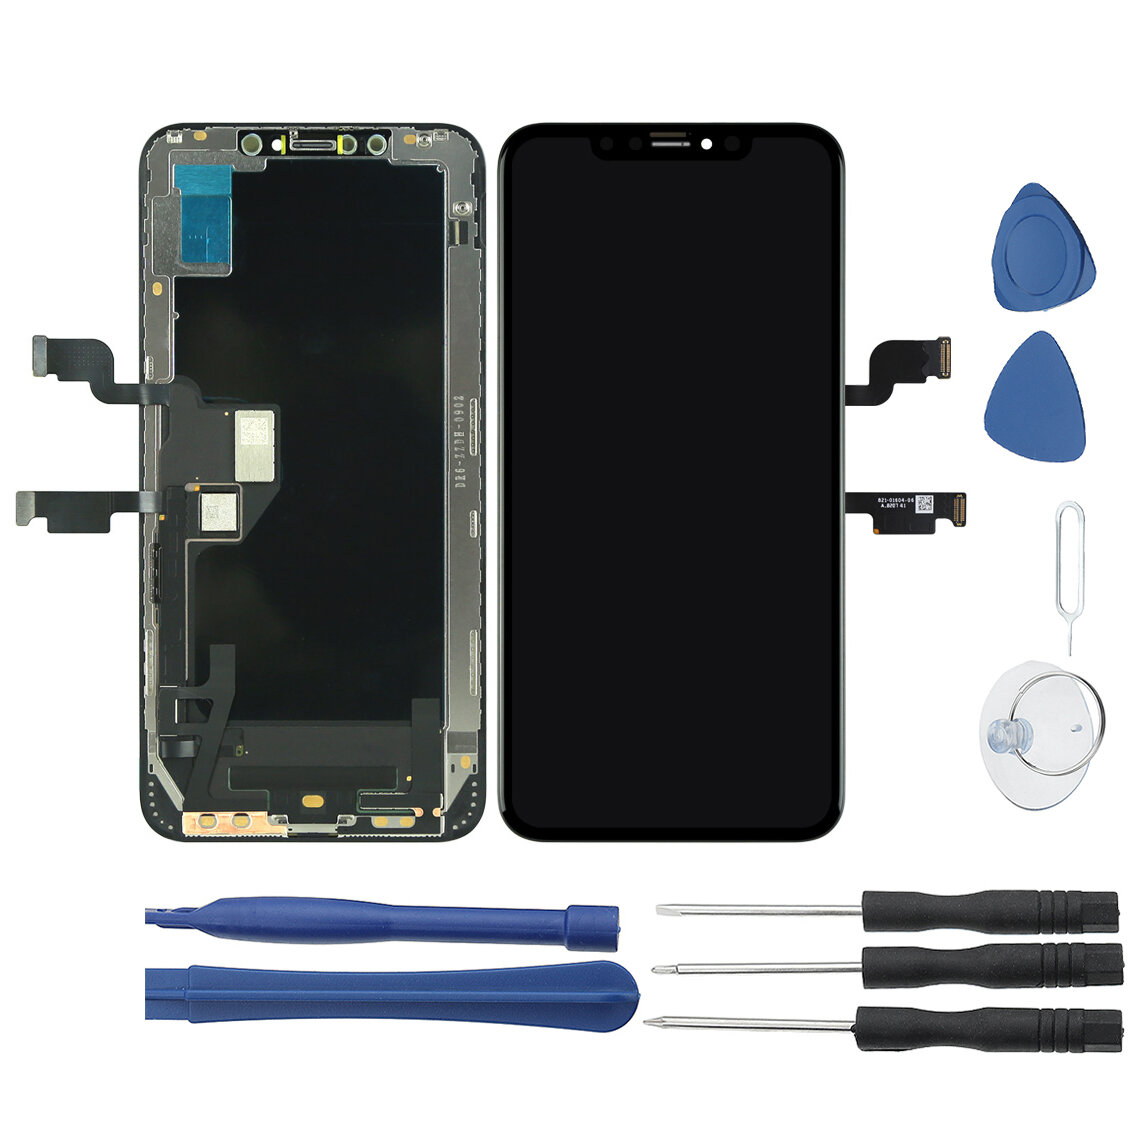 Bakeey OLED Full Assembly No Dead Pixel Display + Touch Screen Digitizer Replacement + Repair Tools For iPhone XS Max